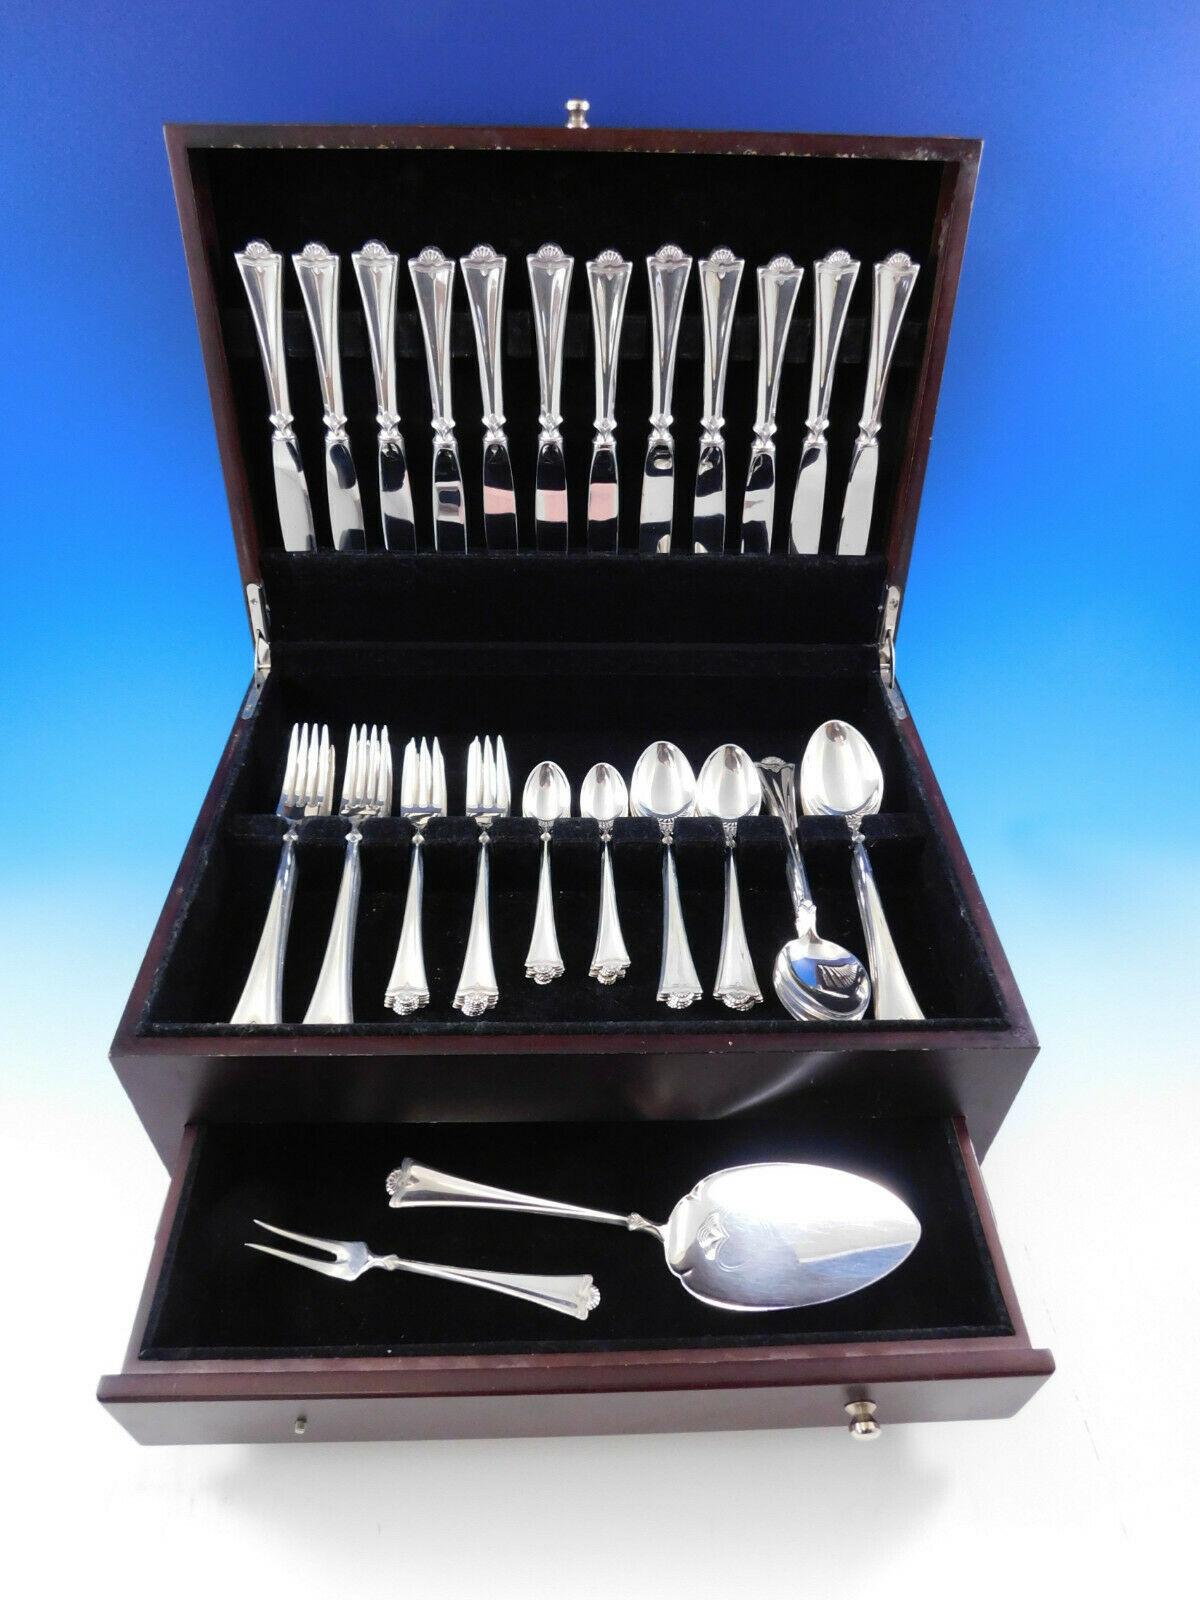 Rare Konval by Th. Olsens 830 silver Scandinavian Modern flatware set - 73 pieces. This set includes:

12 knives, 8 1/2